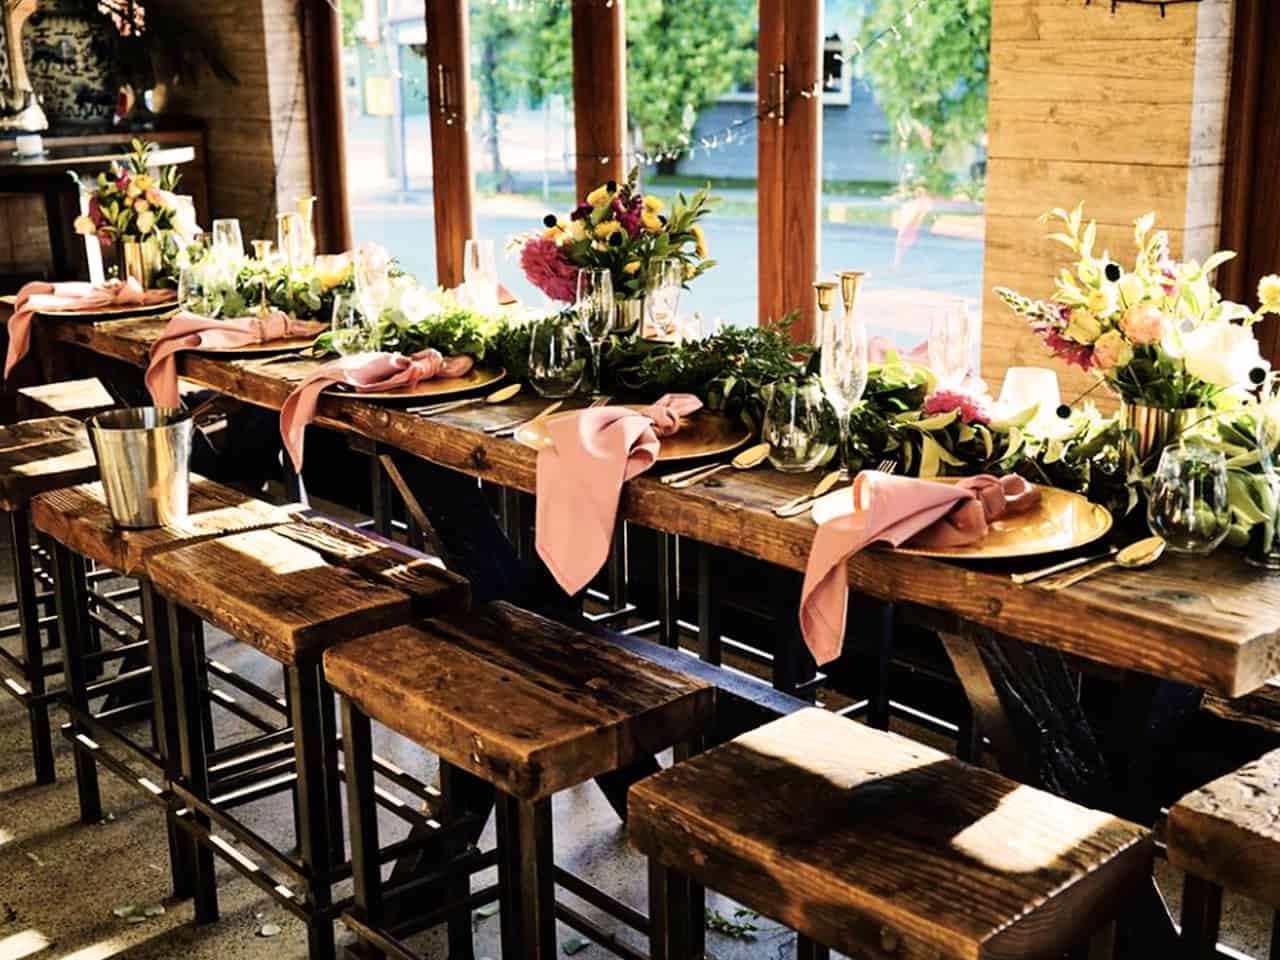 Long table set for dining for wedding